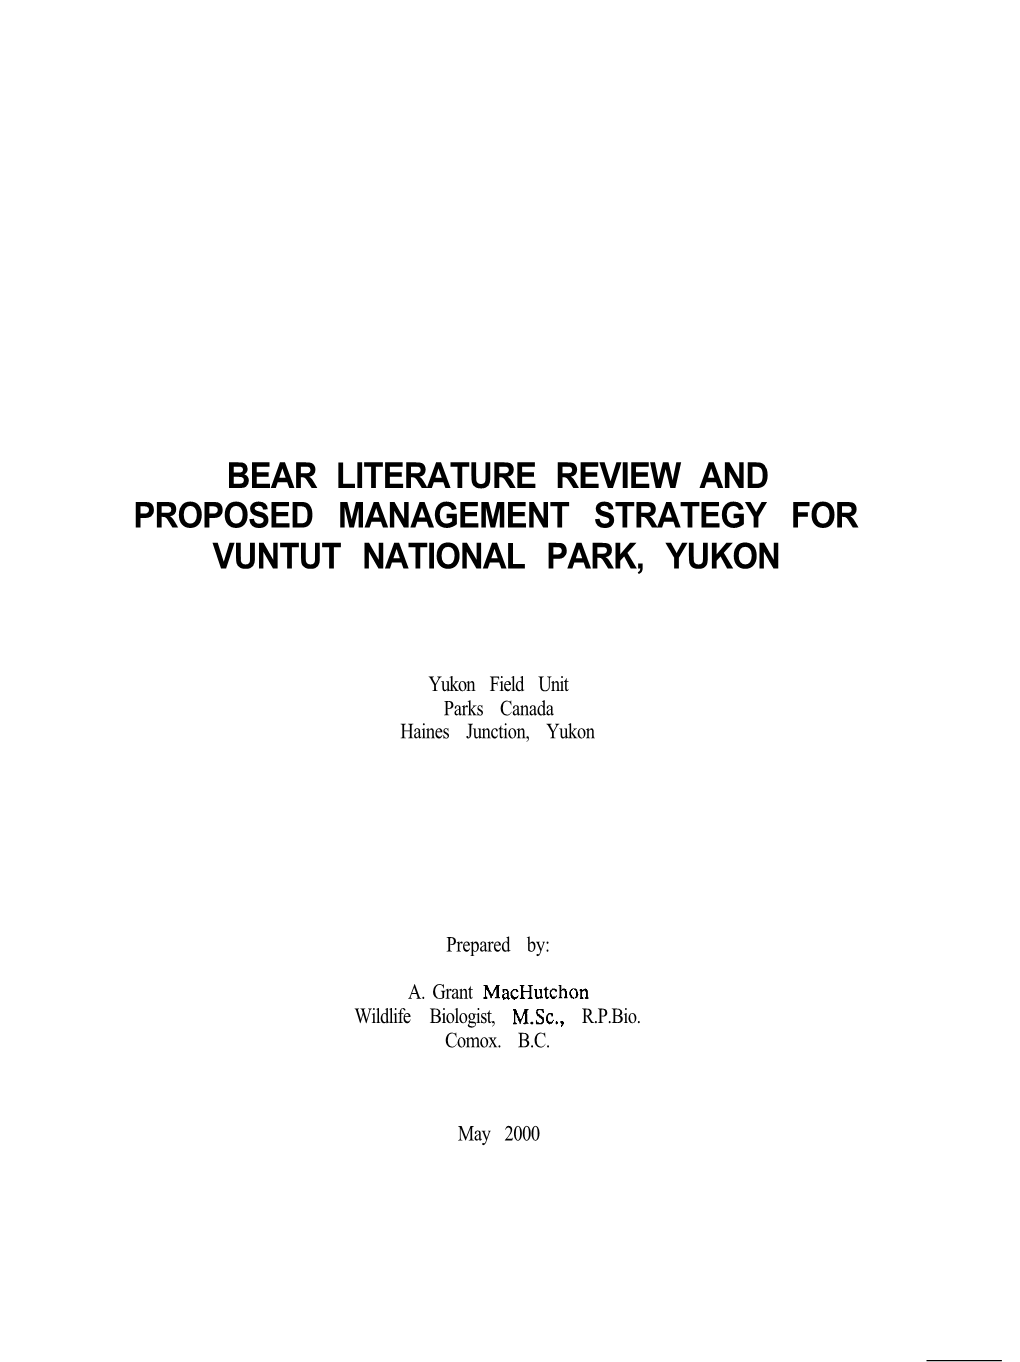 Bear Literature Review and Proposed Management Strategy for Vuntut National Park, Yukon